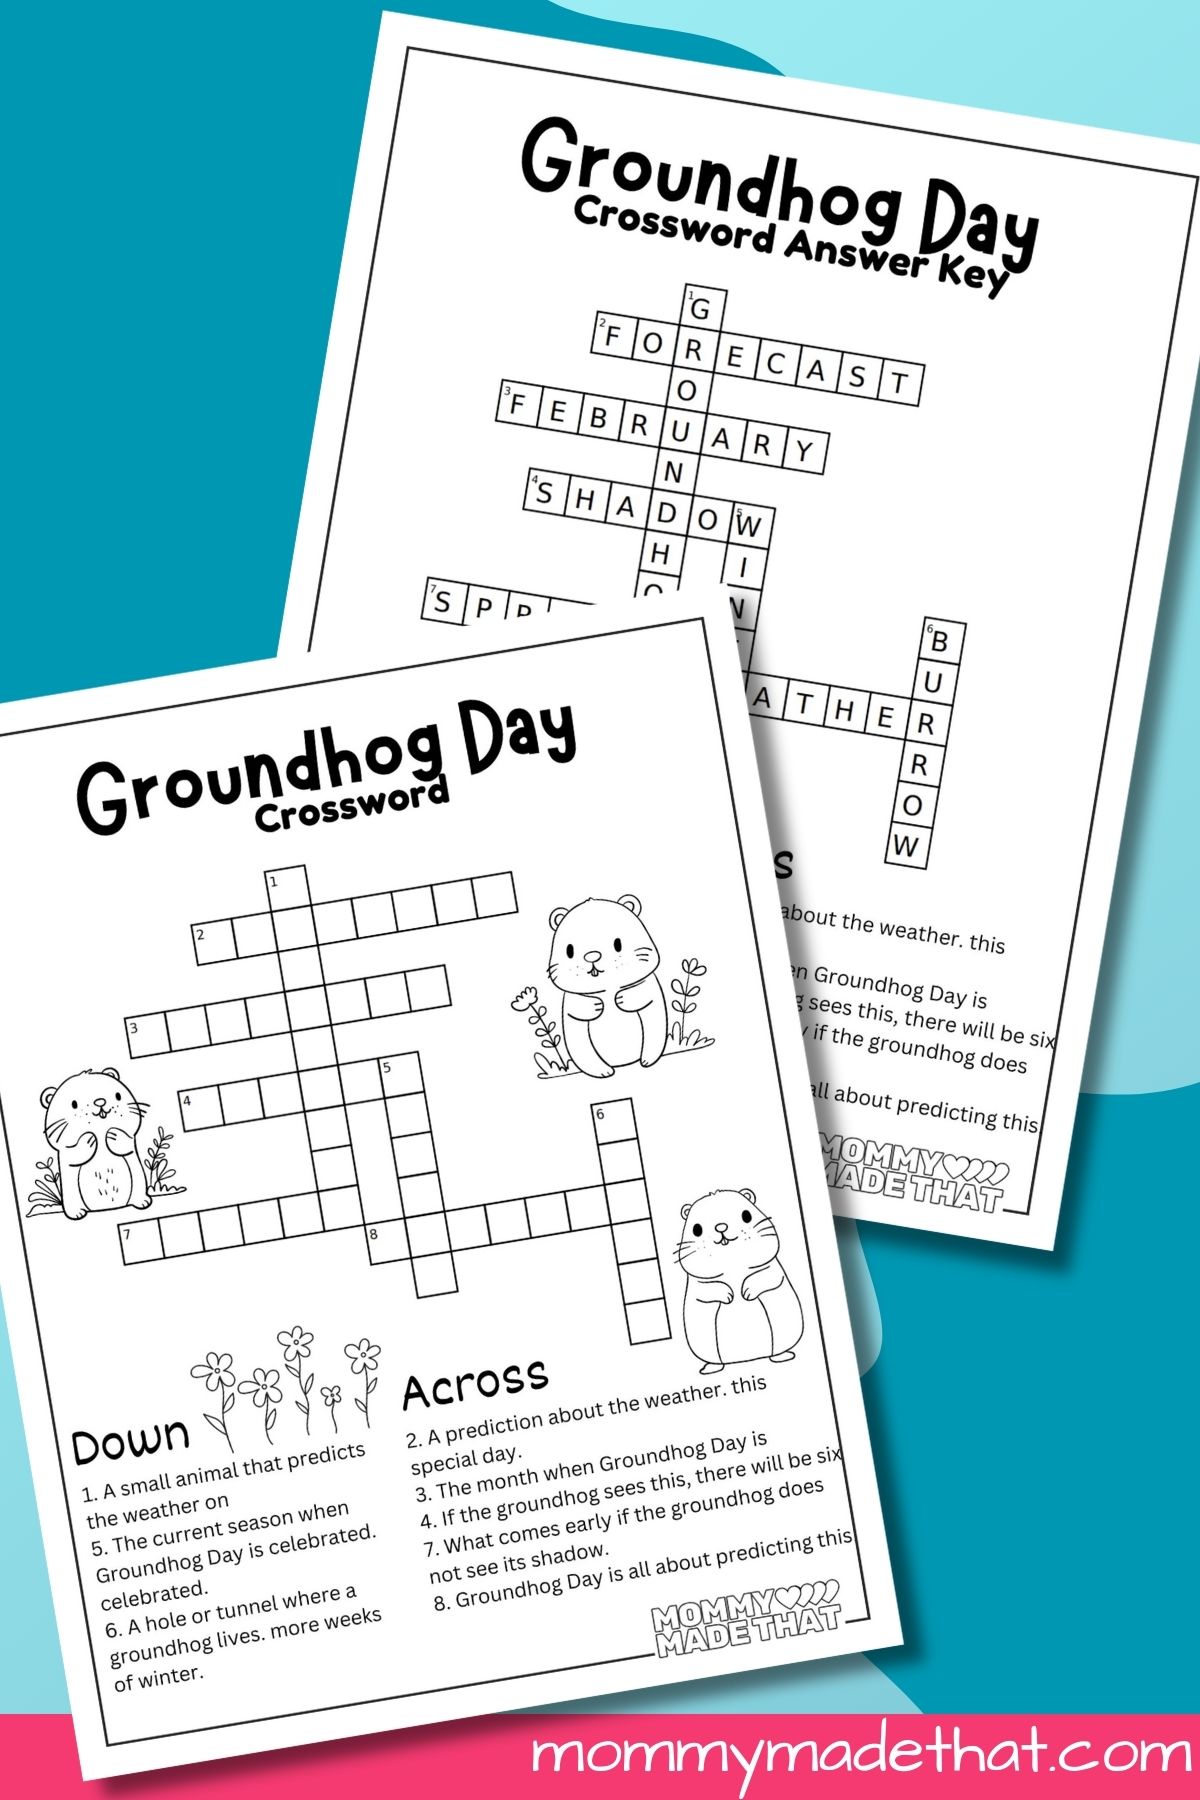 Free printable Groundhog day crossword puzzle and answer key.